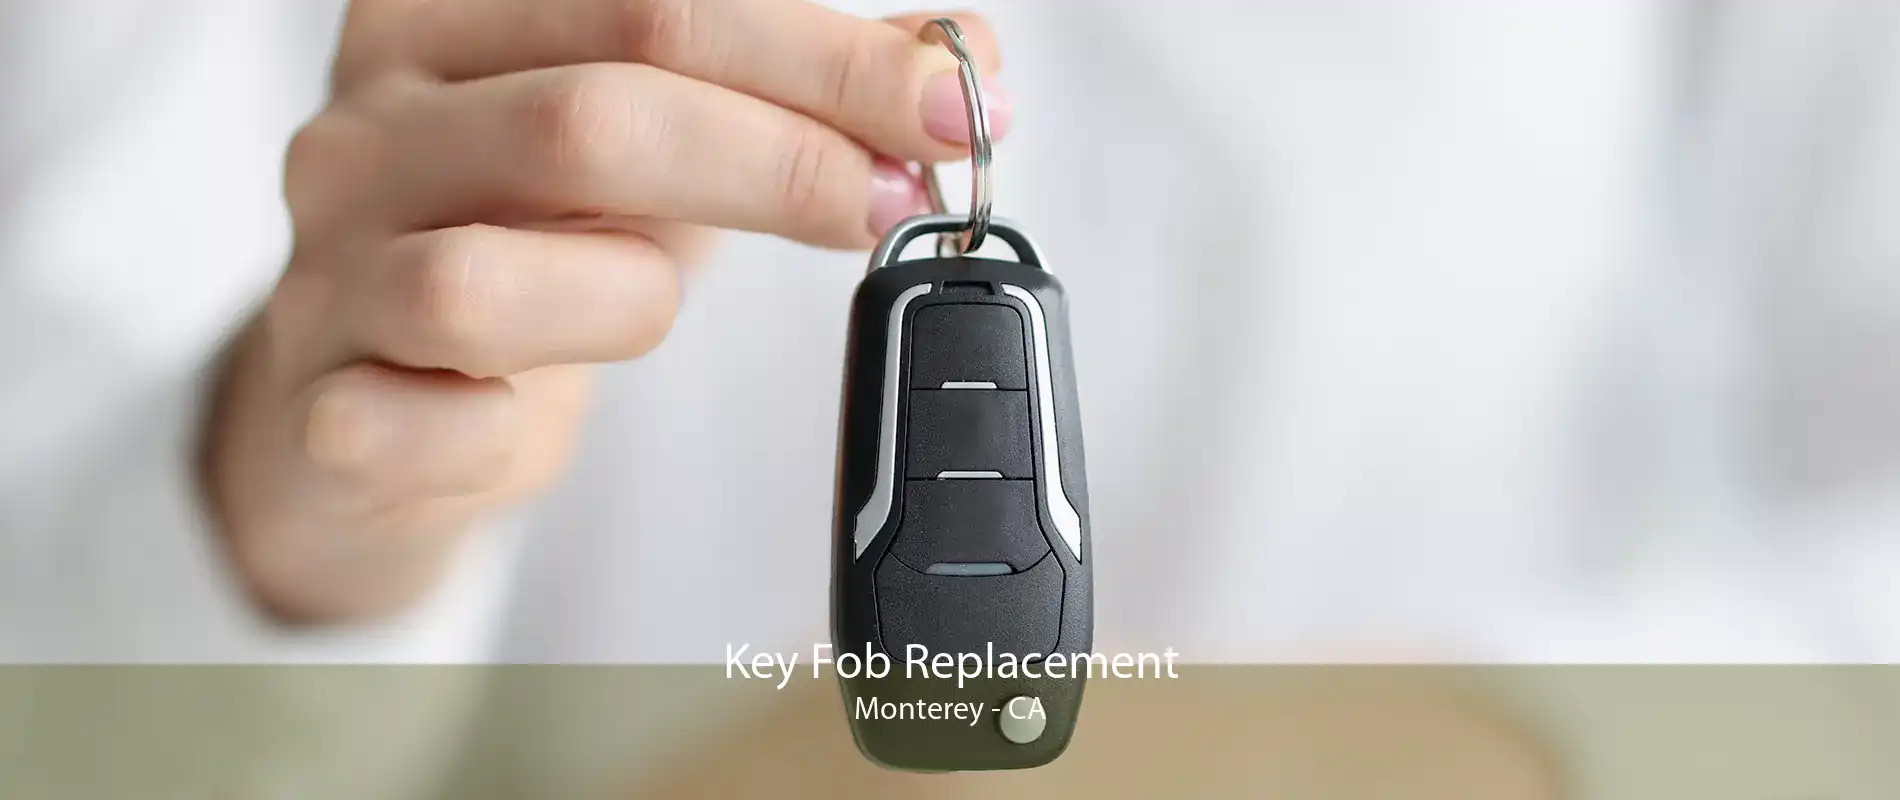 Key Fob Replacement Monterey - CA